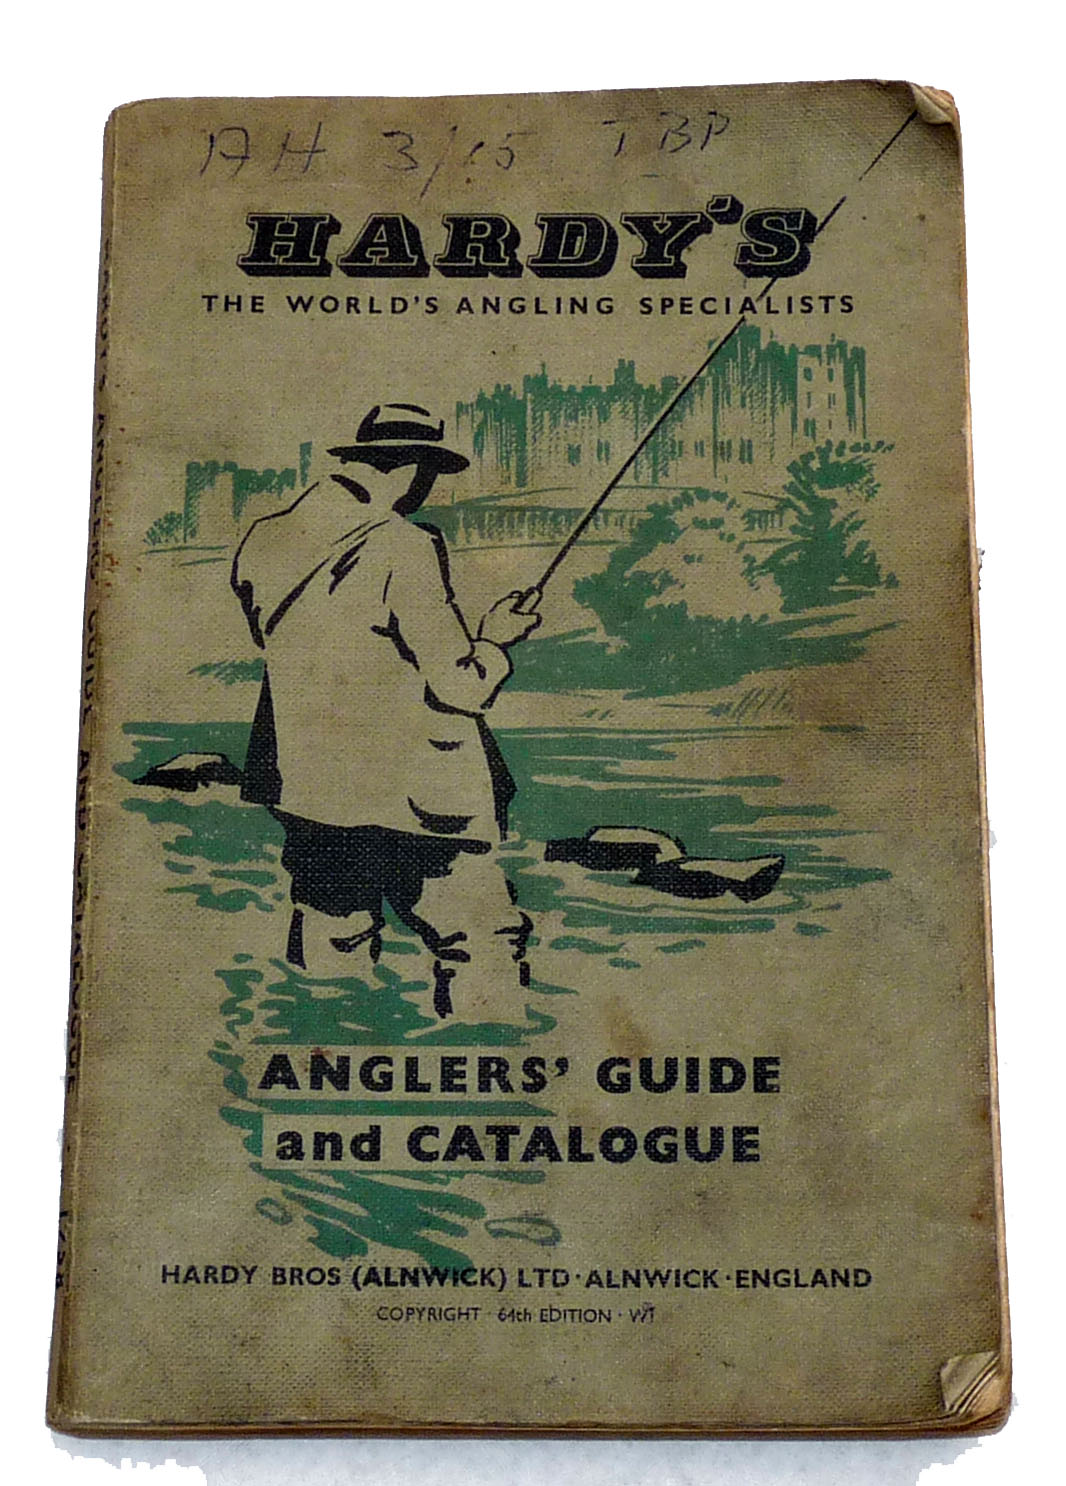 HARDY ANGLERS GUIDE: Hardy angler’s guide 1957, green cloth binding, notations to top, 248 pages,